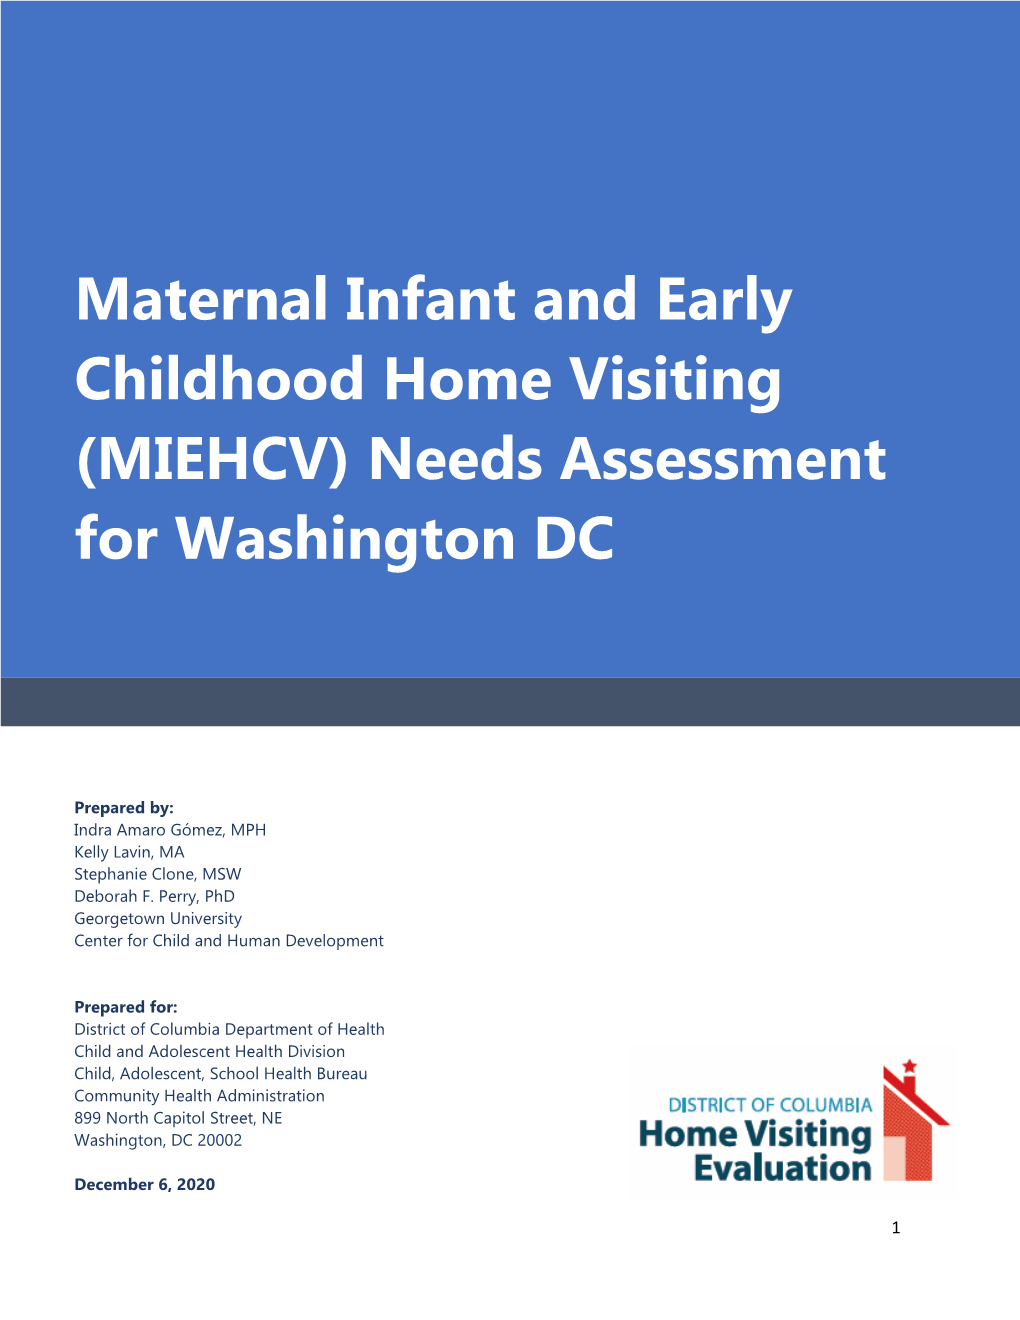 Maternal Infant and Early Childhood Home Visiting (MIEHCV) Needs Assessment for Washington DC